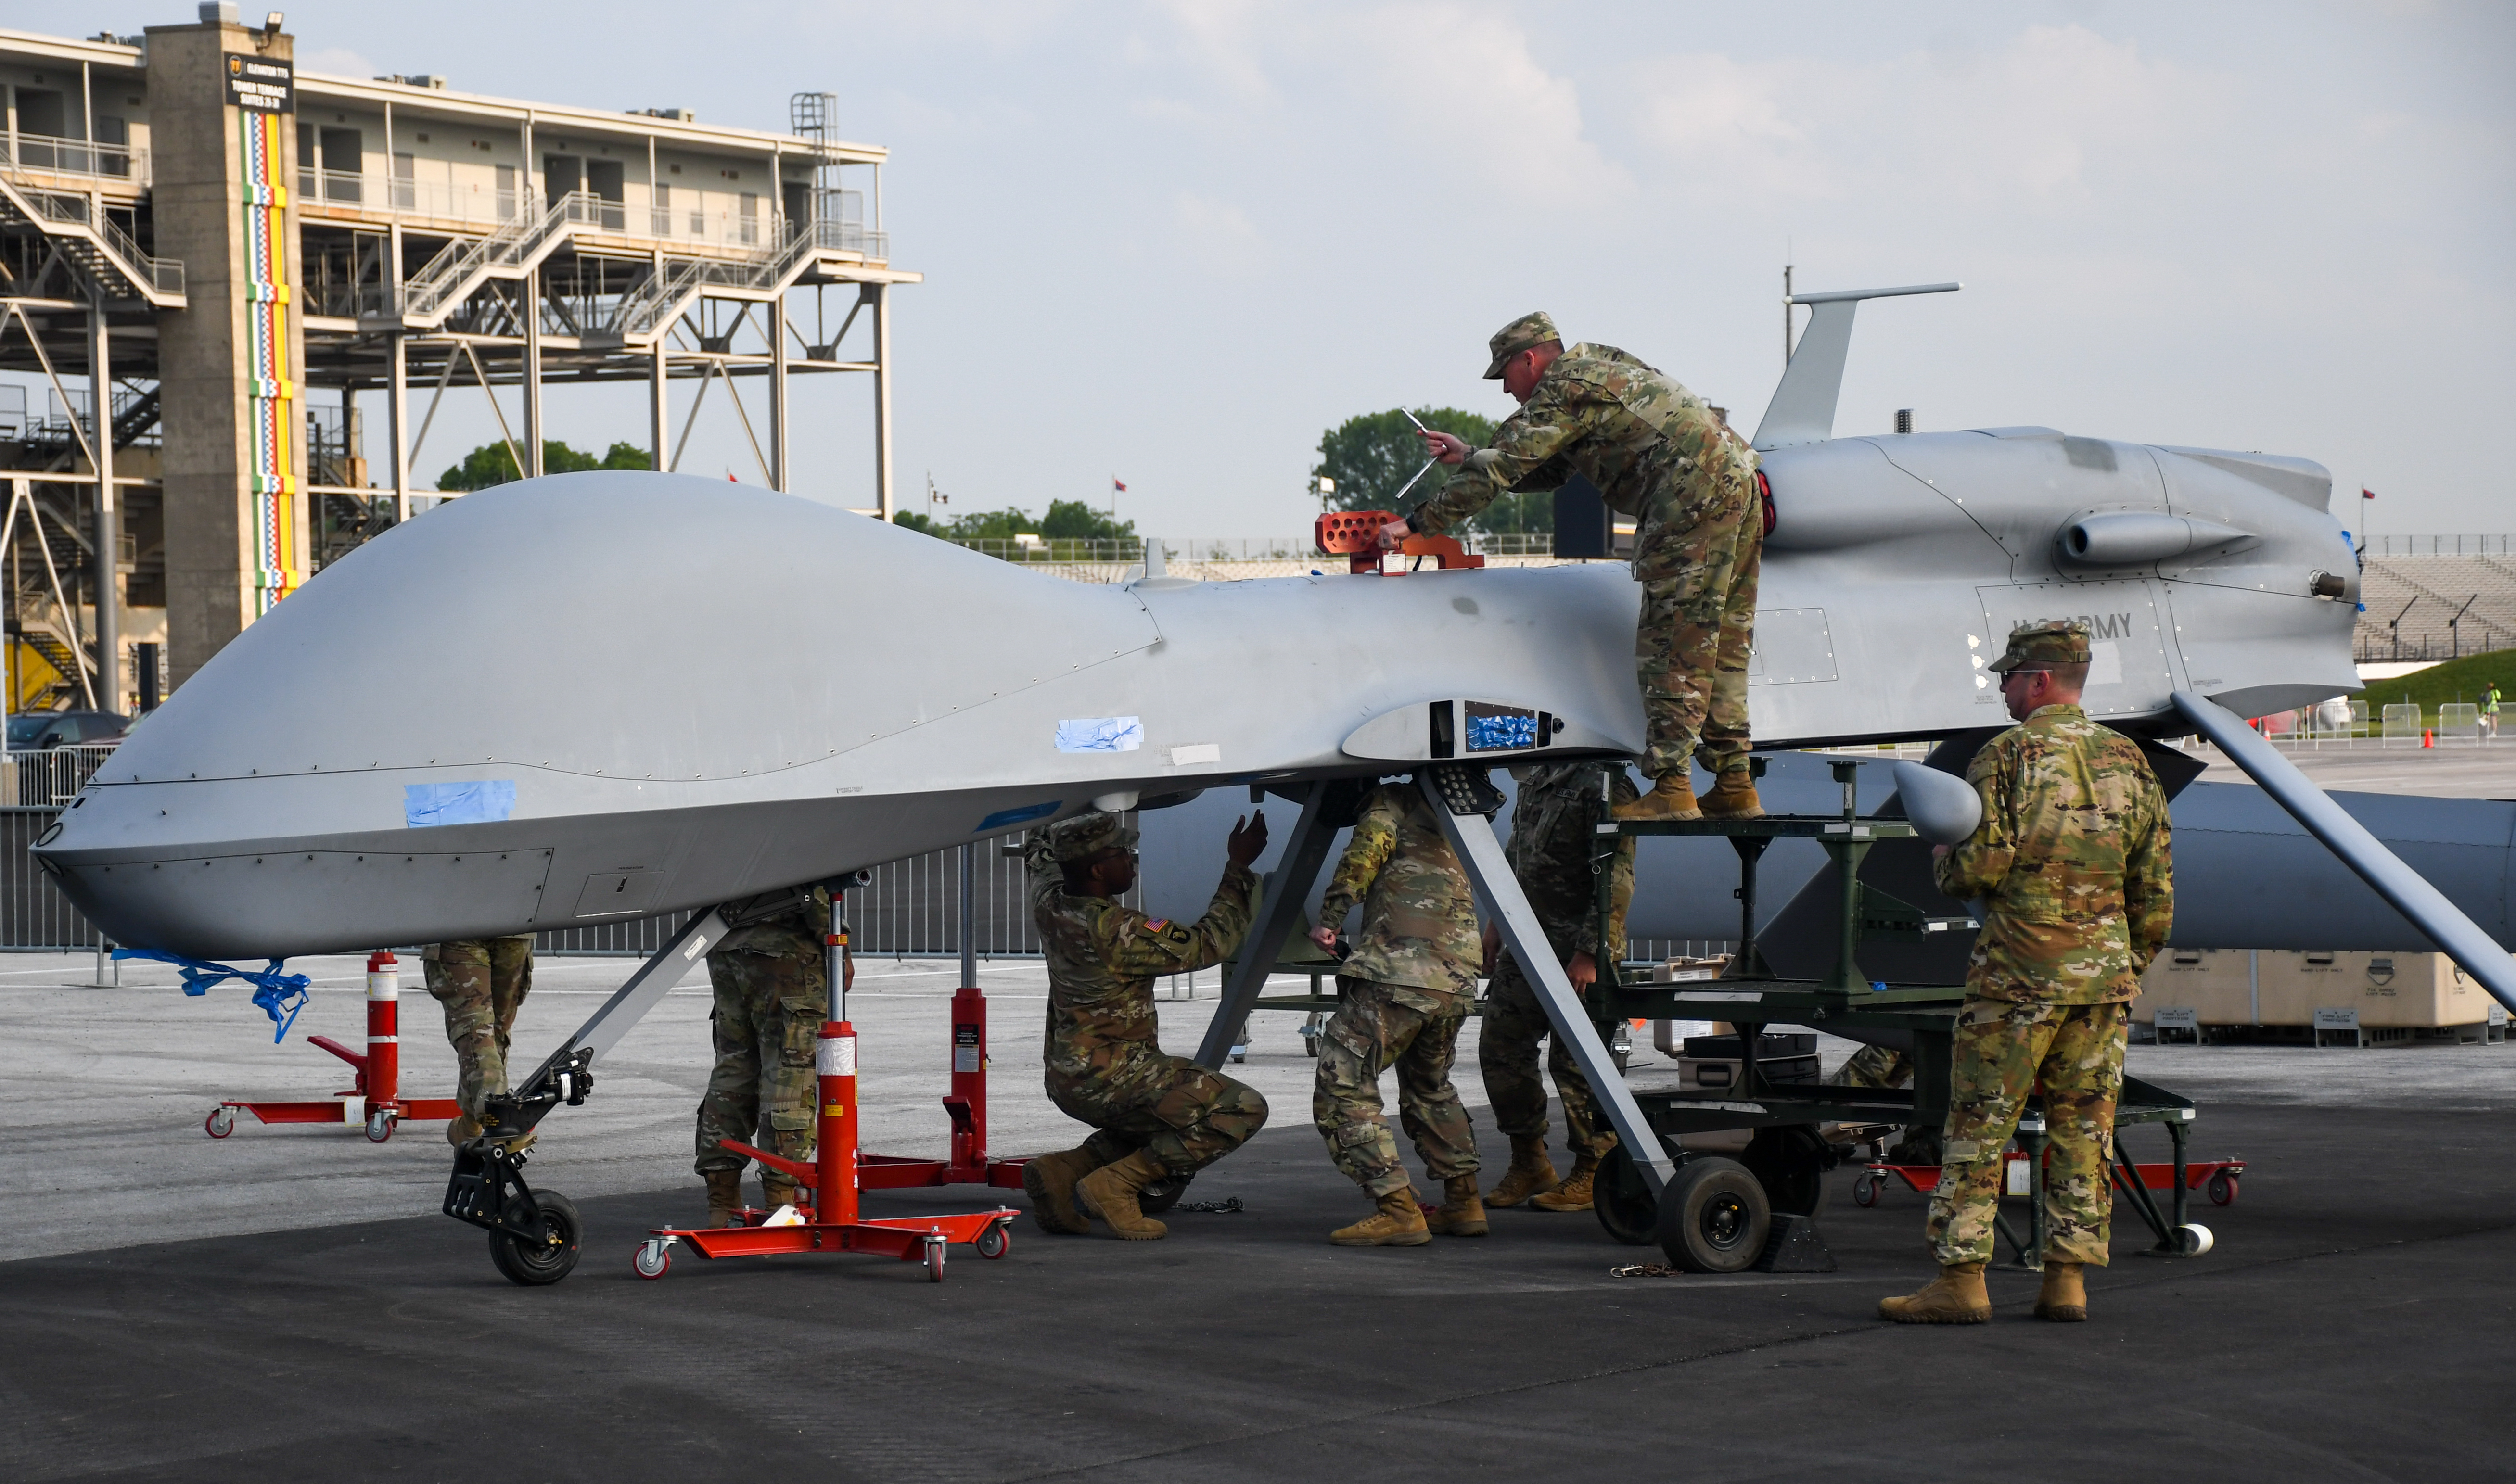 Gray Eagle: US studying how to modify powerful armed drone as